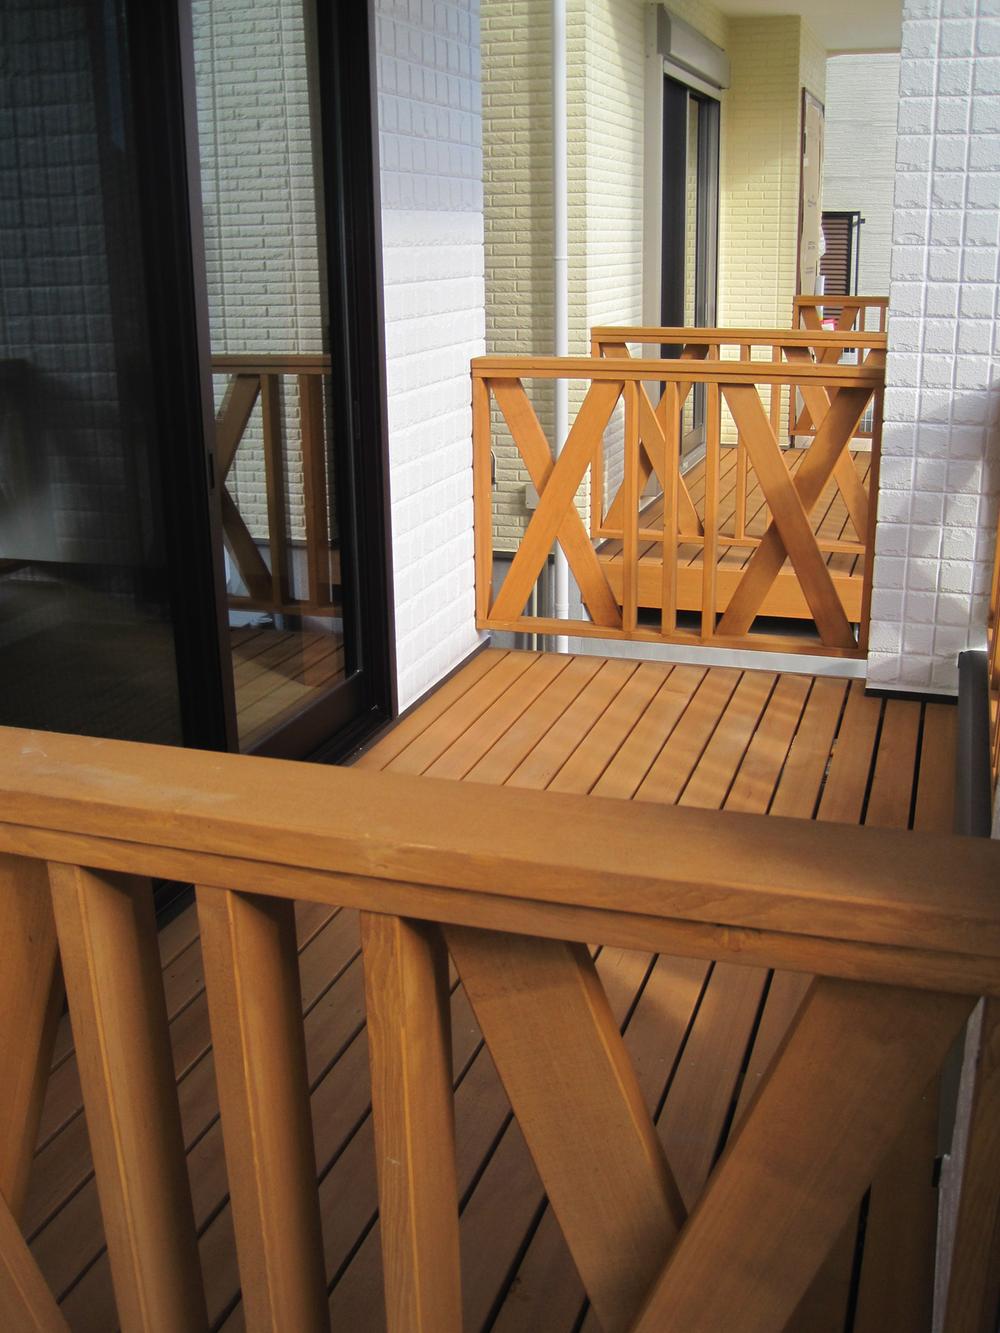 Other introspection.  ■ Wood deck facing the living room. As a space of the room